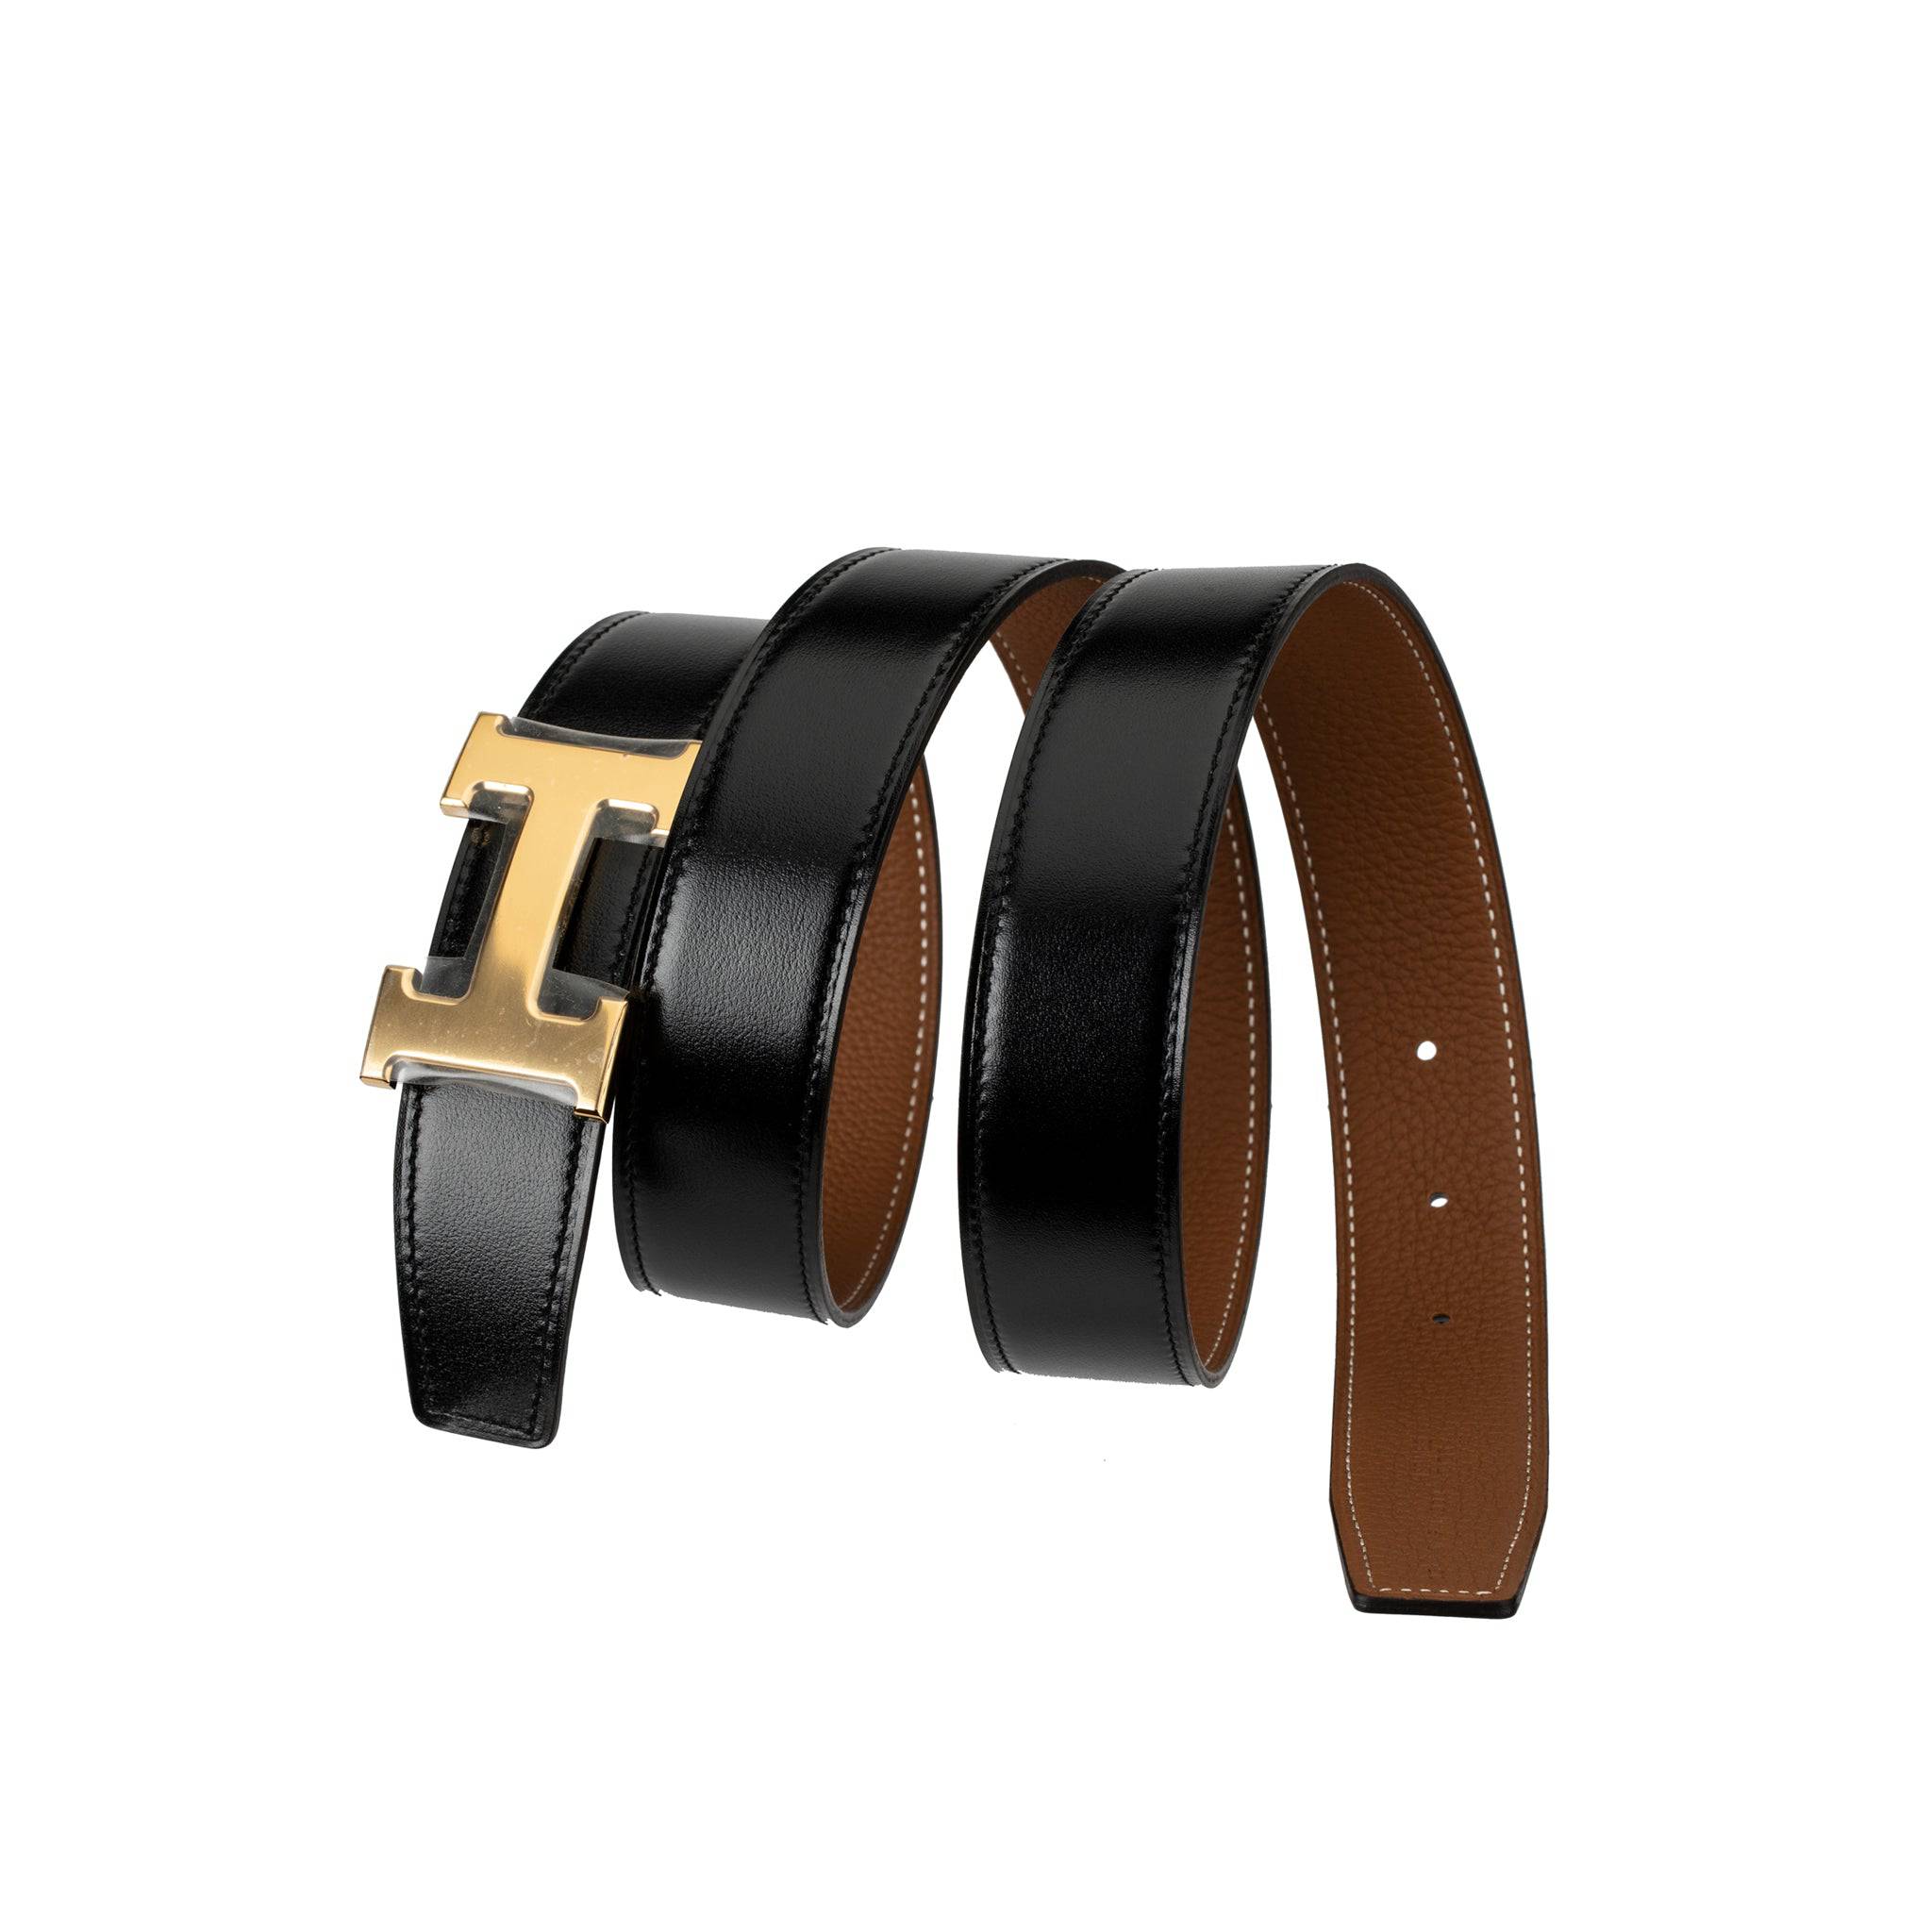 HERMES REVERSIBLE BELT BLACK AND GOLD BRUSHED GOLD BUCKLE 95CM - On Repeat